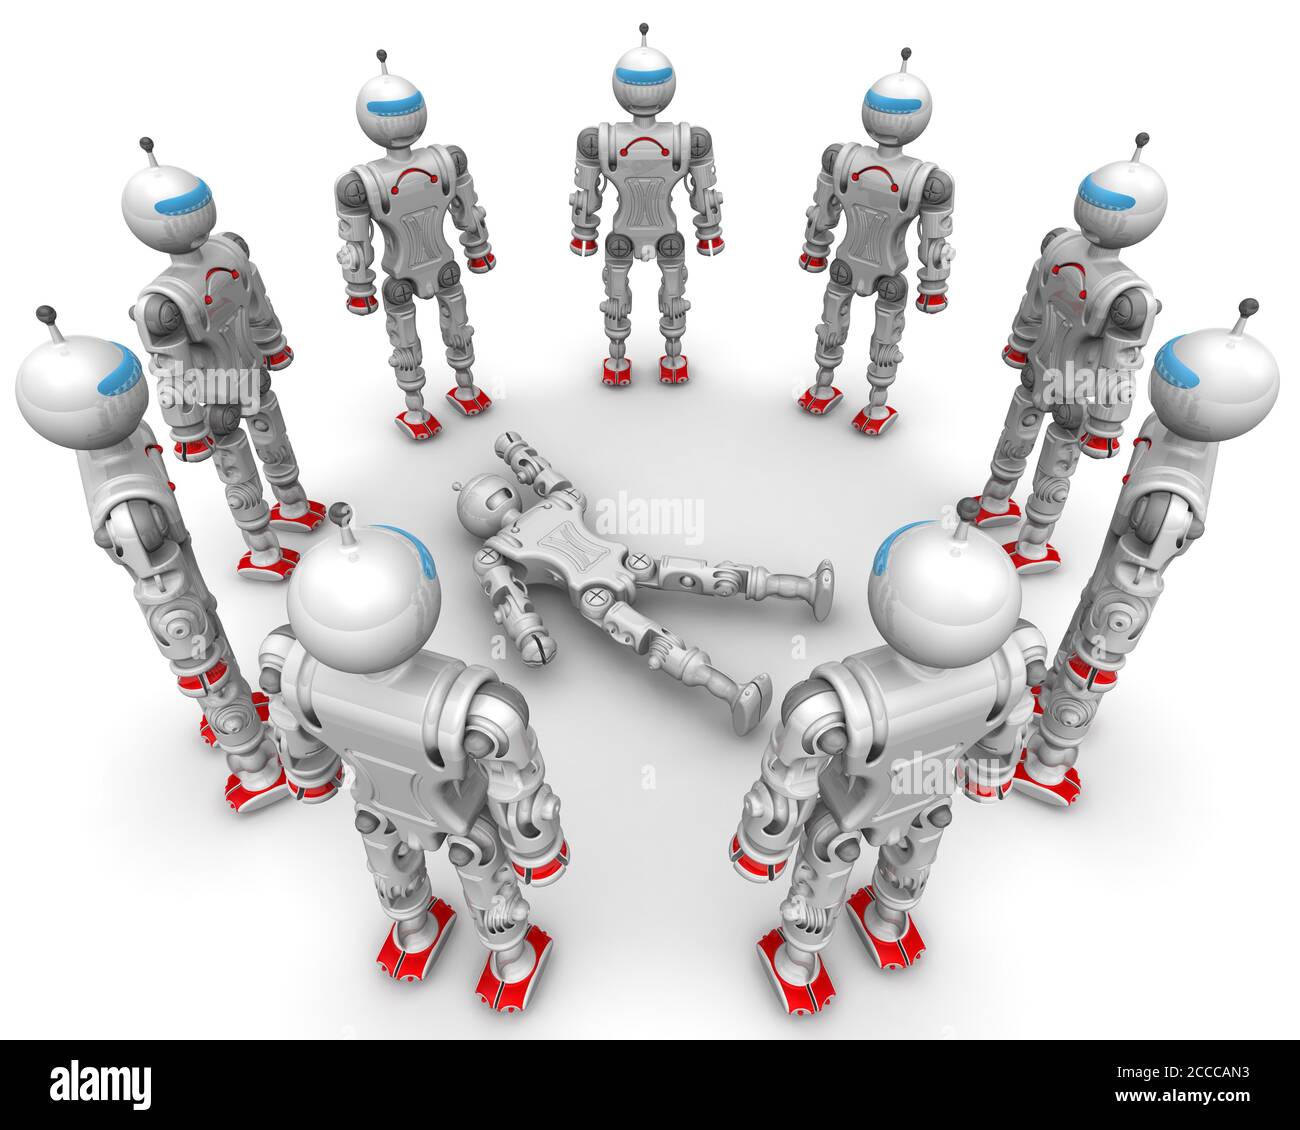 Defective robot surrounded operable. Operable humanoid robots standing in a cirсle on a white surface around a faulty robot. 3D illustration Stock Photo